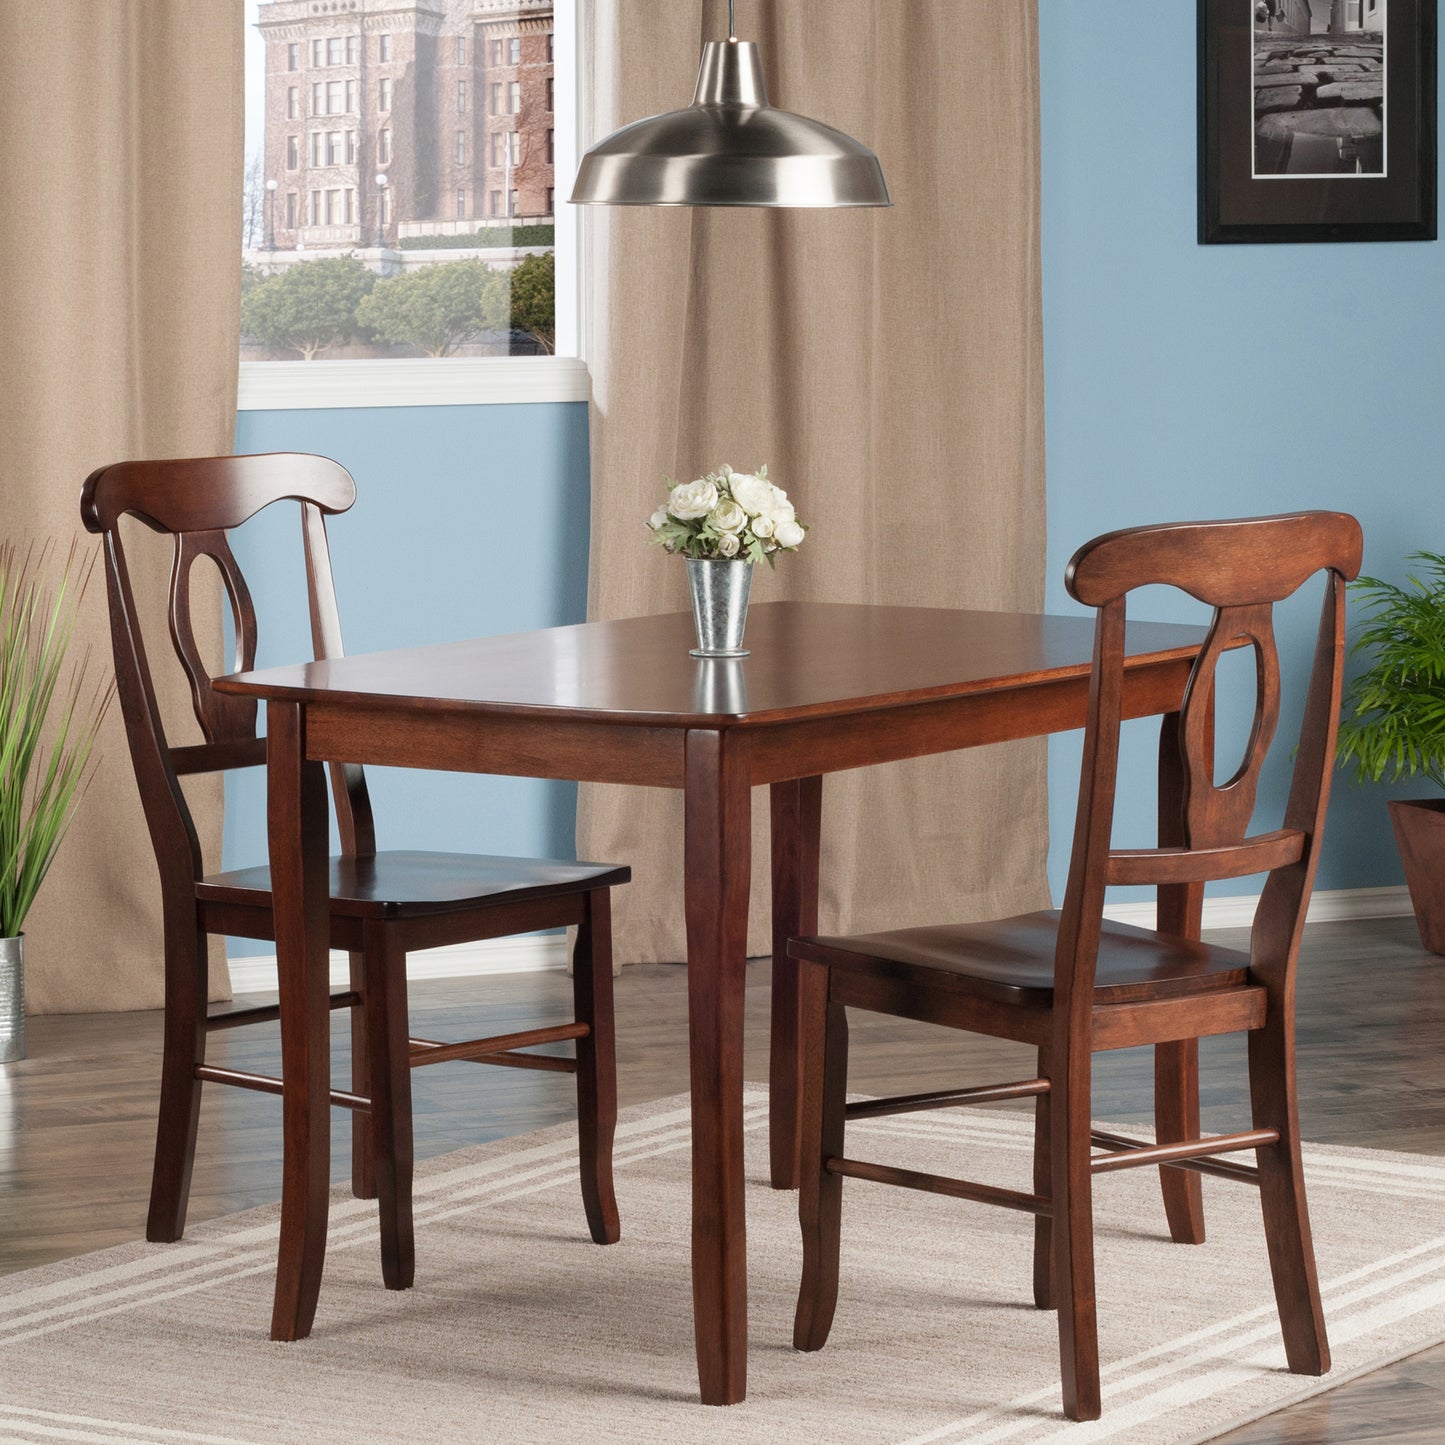 Inglewood 3-Pc Dining Table with Key Hole Chairs, Walnut